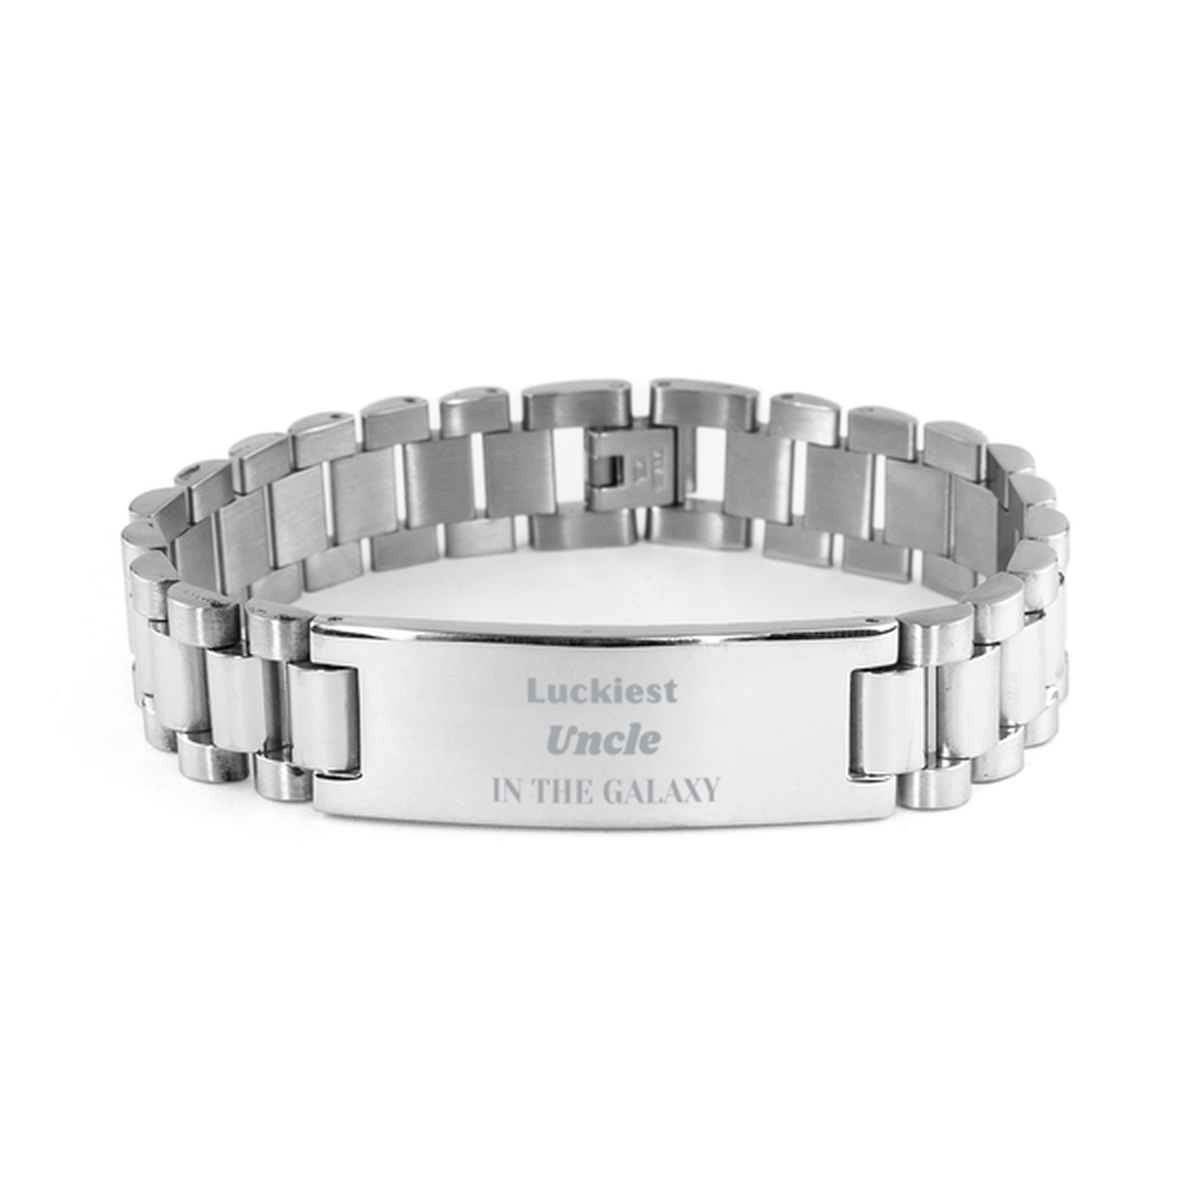 Luckiest Uncle in the Galaxy, To My Uncle Engraved Gifts, Christmas Uncle Ladder Stainless Steel Bracelet Gifts, X-mas Birthday Unique Gifts For Uncle Men Women